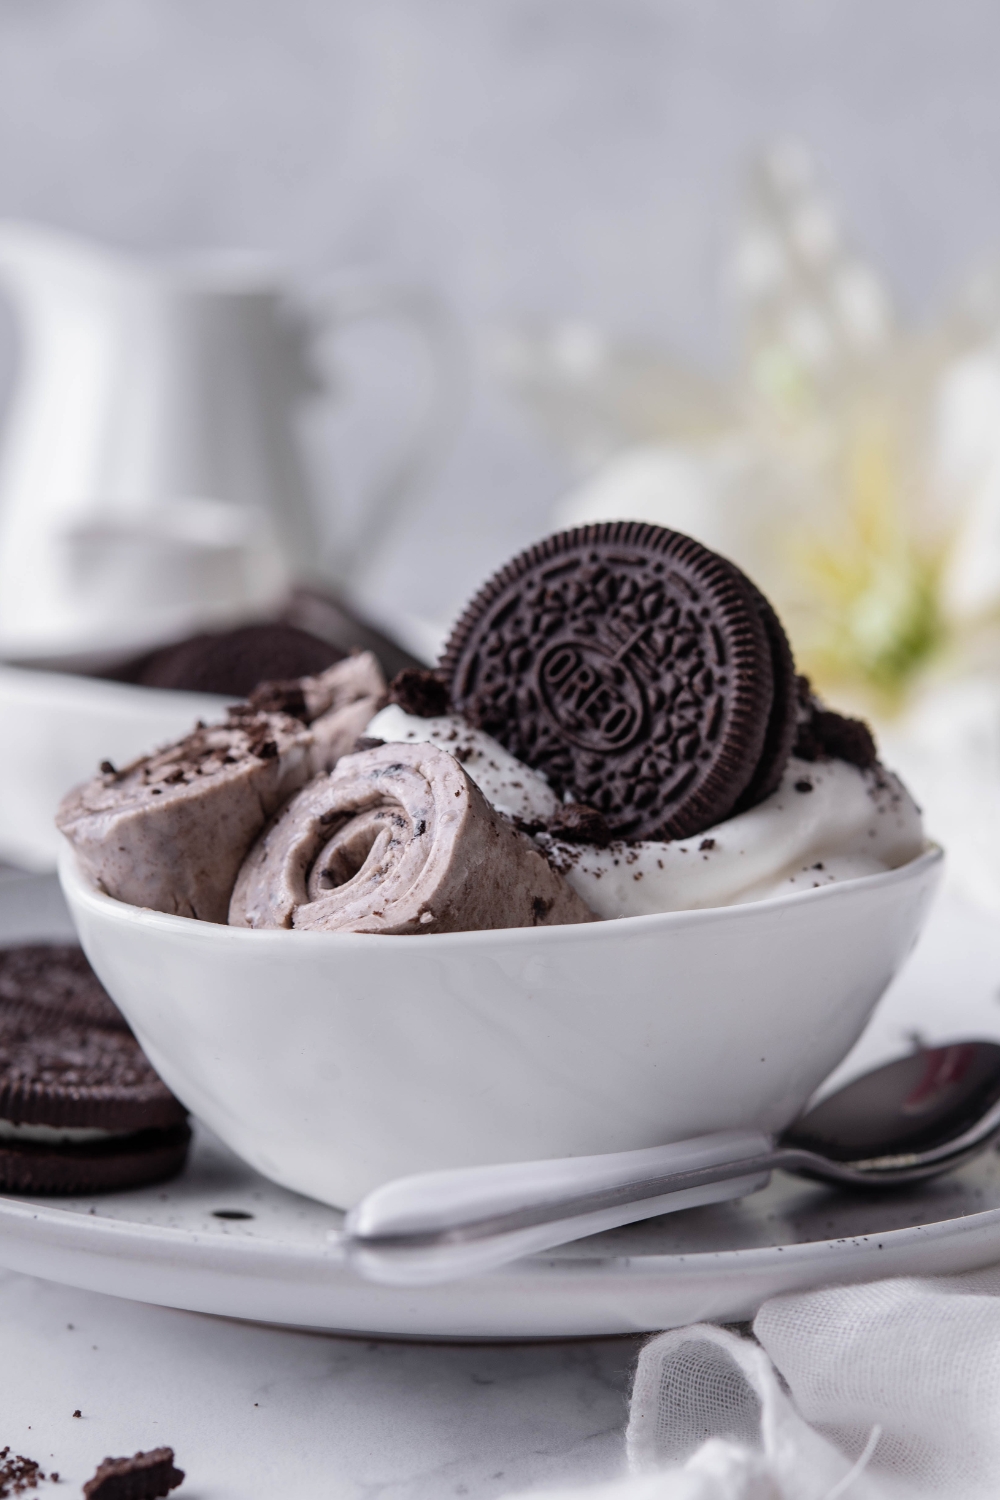 A plate with a bowl with 3 rolled ice creams with whipped cream garnish and a whole oreo.